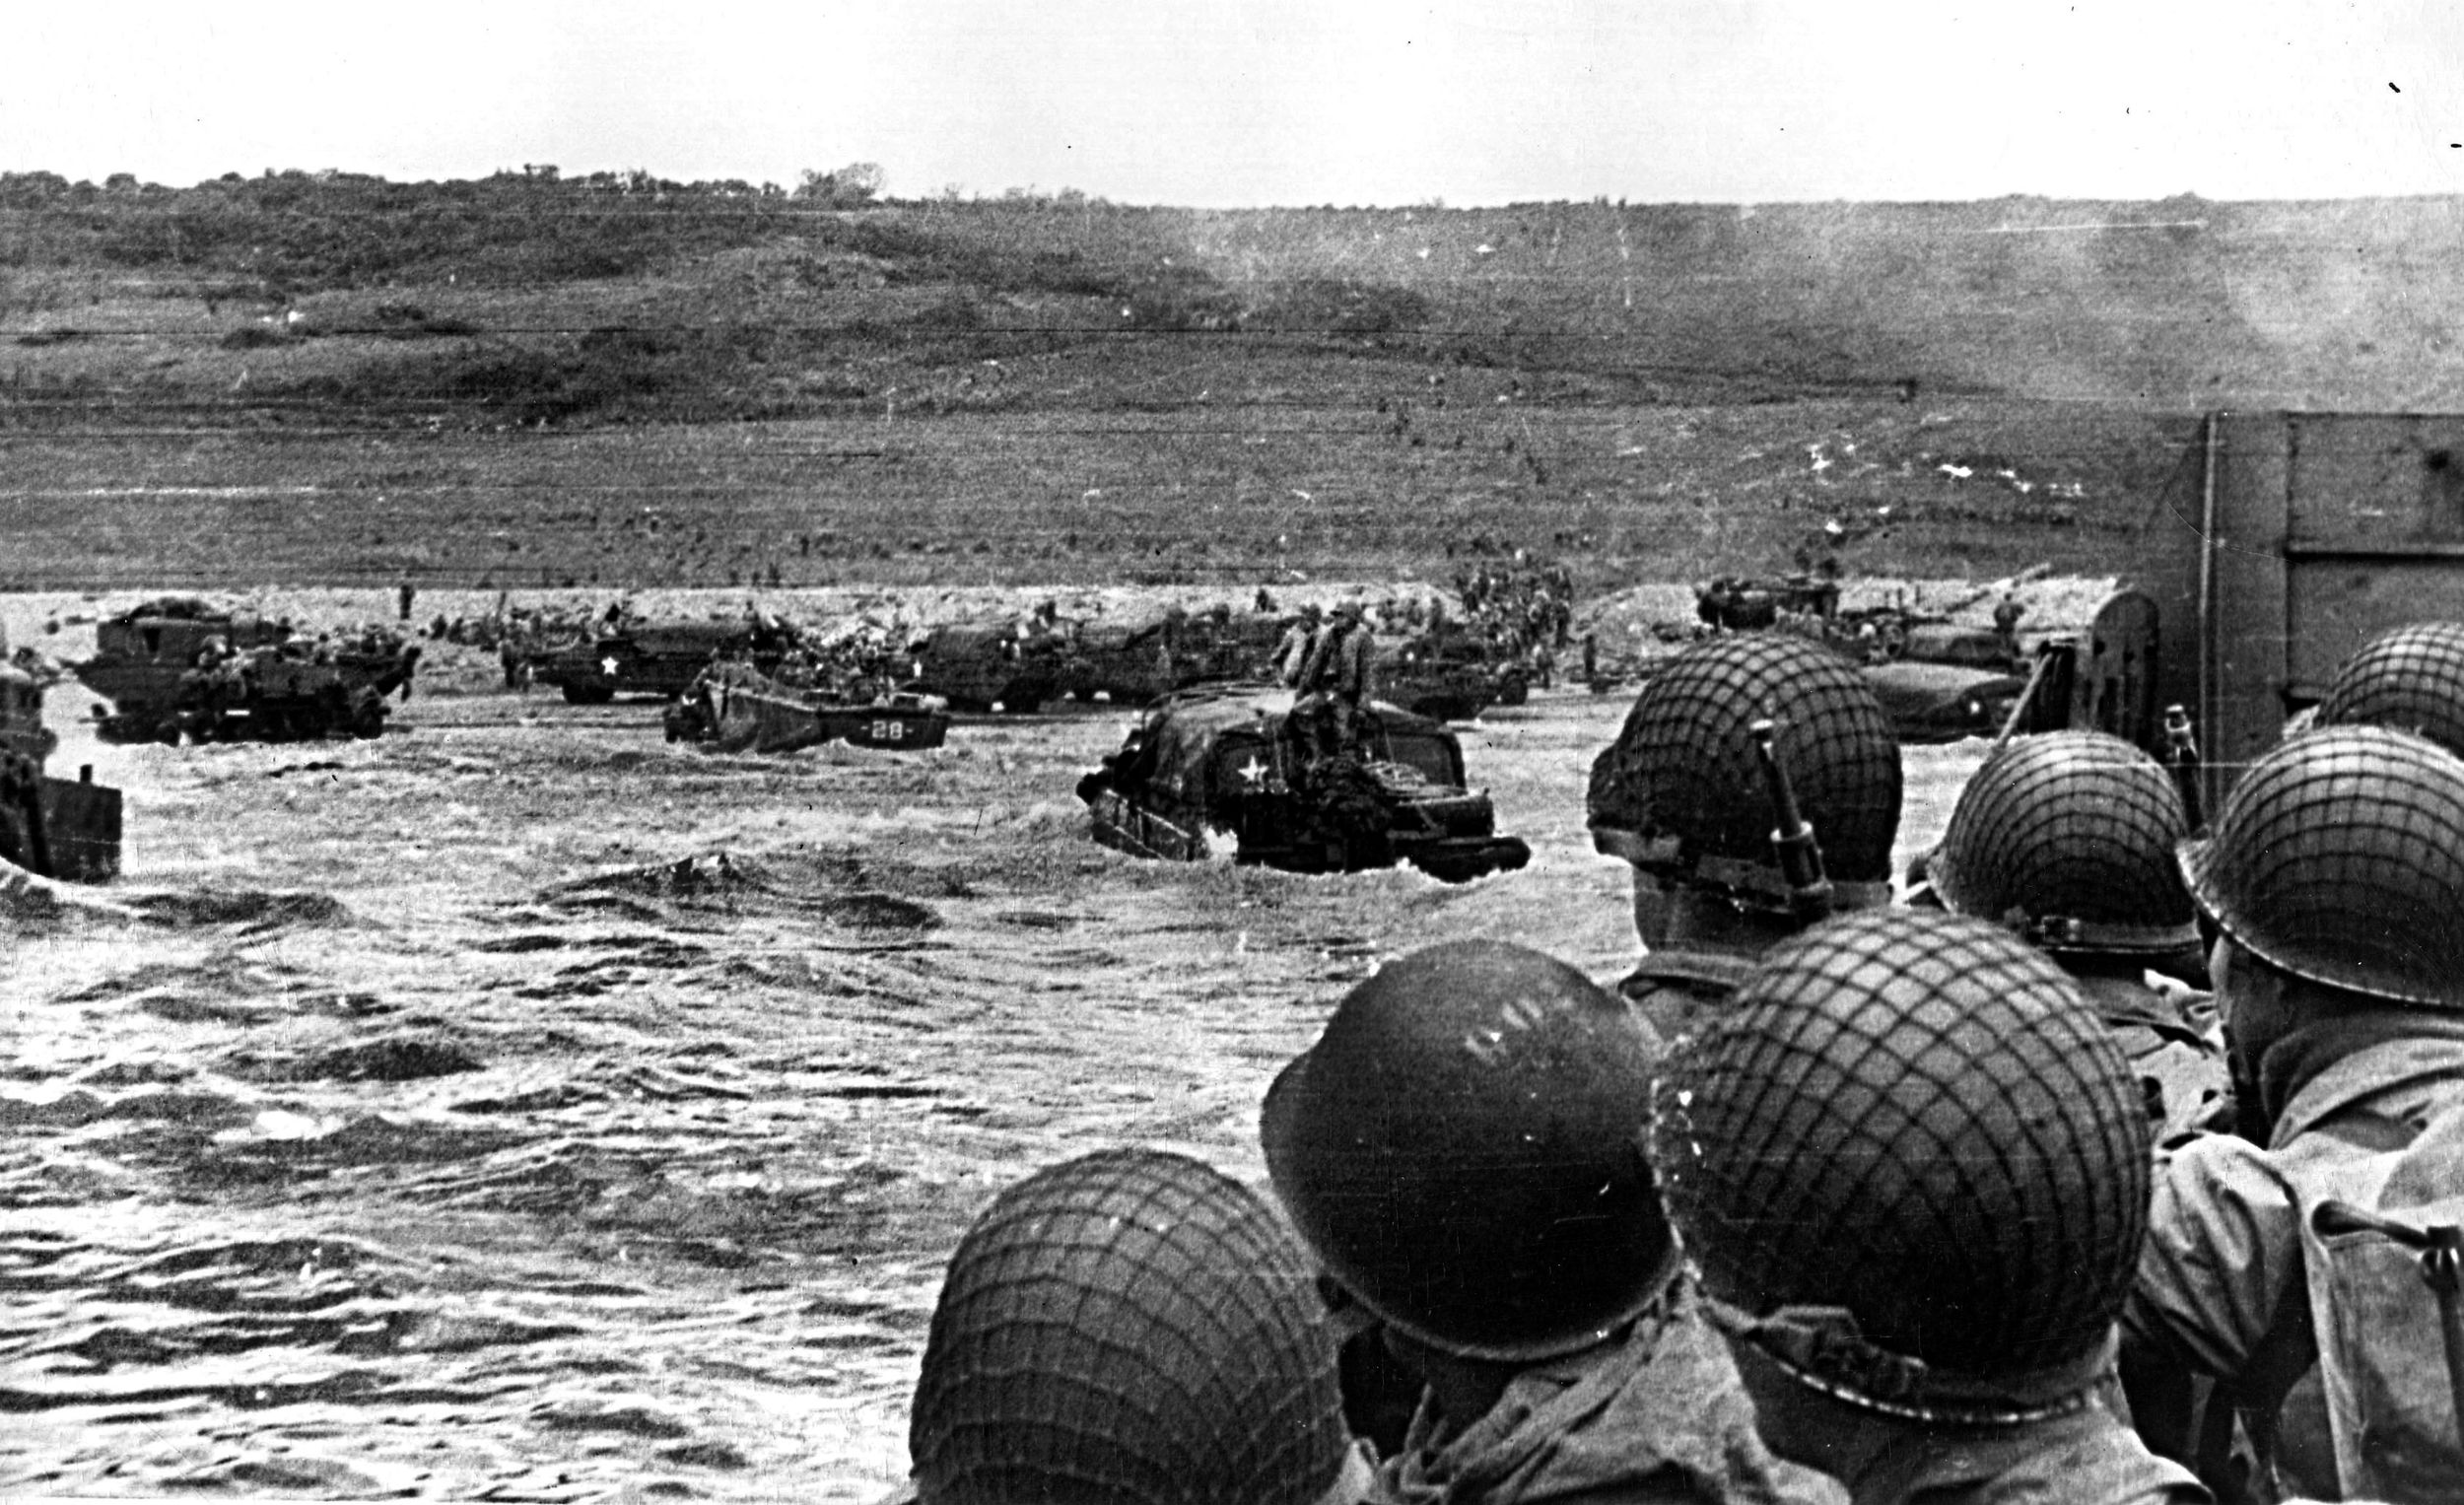 Soldiers of the U.S. 4th Infantry Division stream ashore at Utah Beach in Normandy on June 6, 1944. The 4th Division landed in the wrong place, but Roosevelt and Colonel James Van Fleet, commander of the 8th Infantry Regiment, famously resolved to start the war where they were. Roosevelt was the only Allied general officer to go ashore during the first wave on D-Day. 